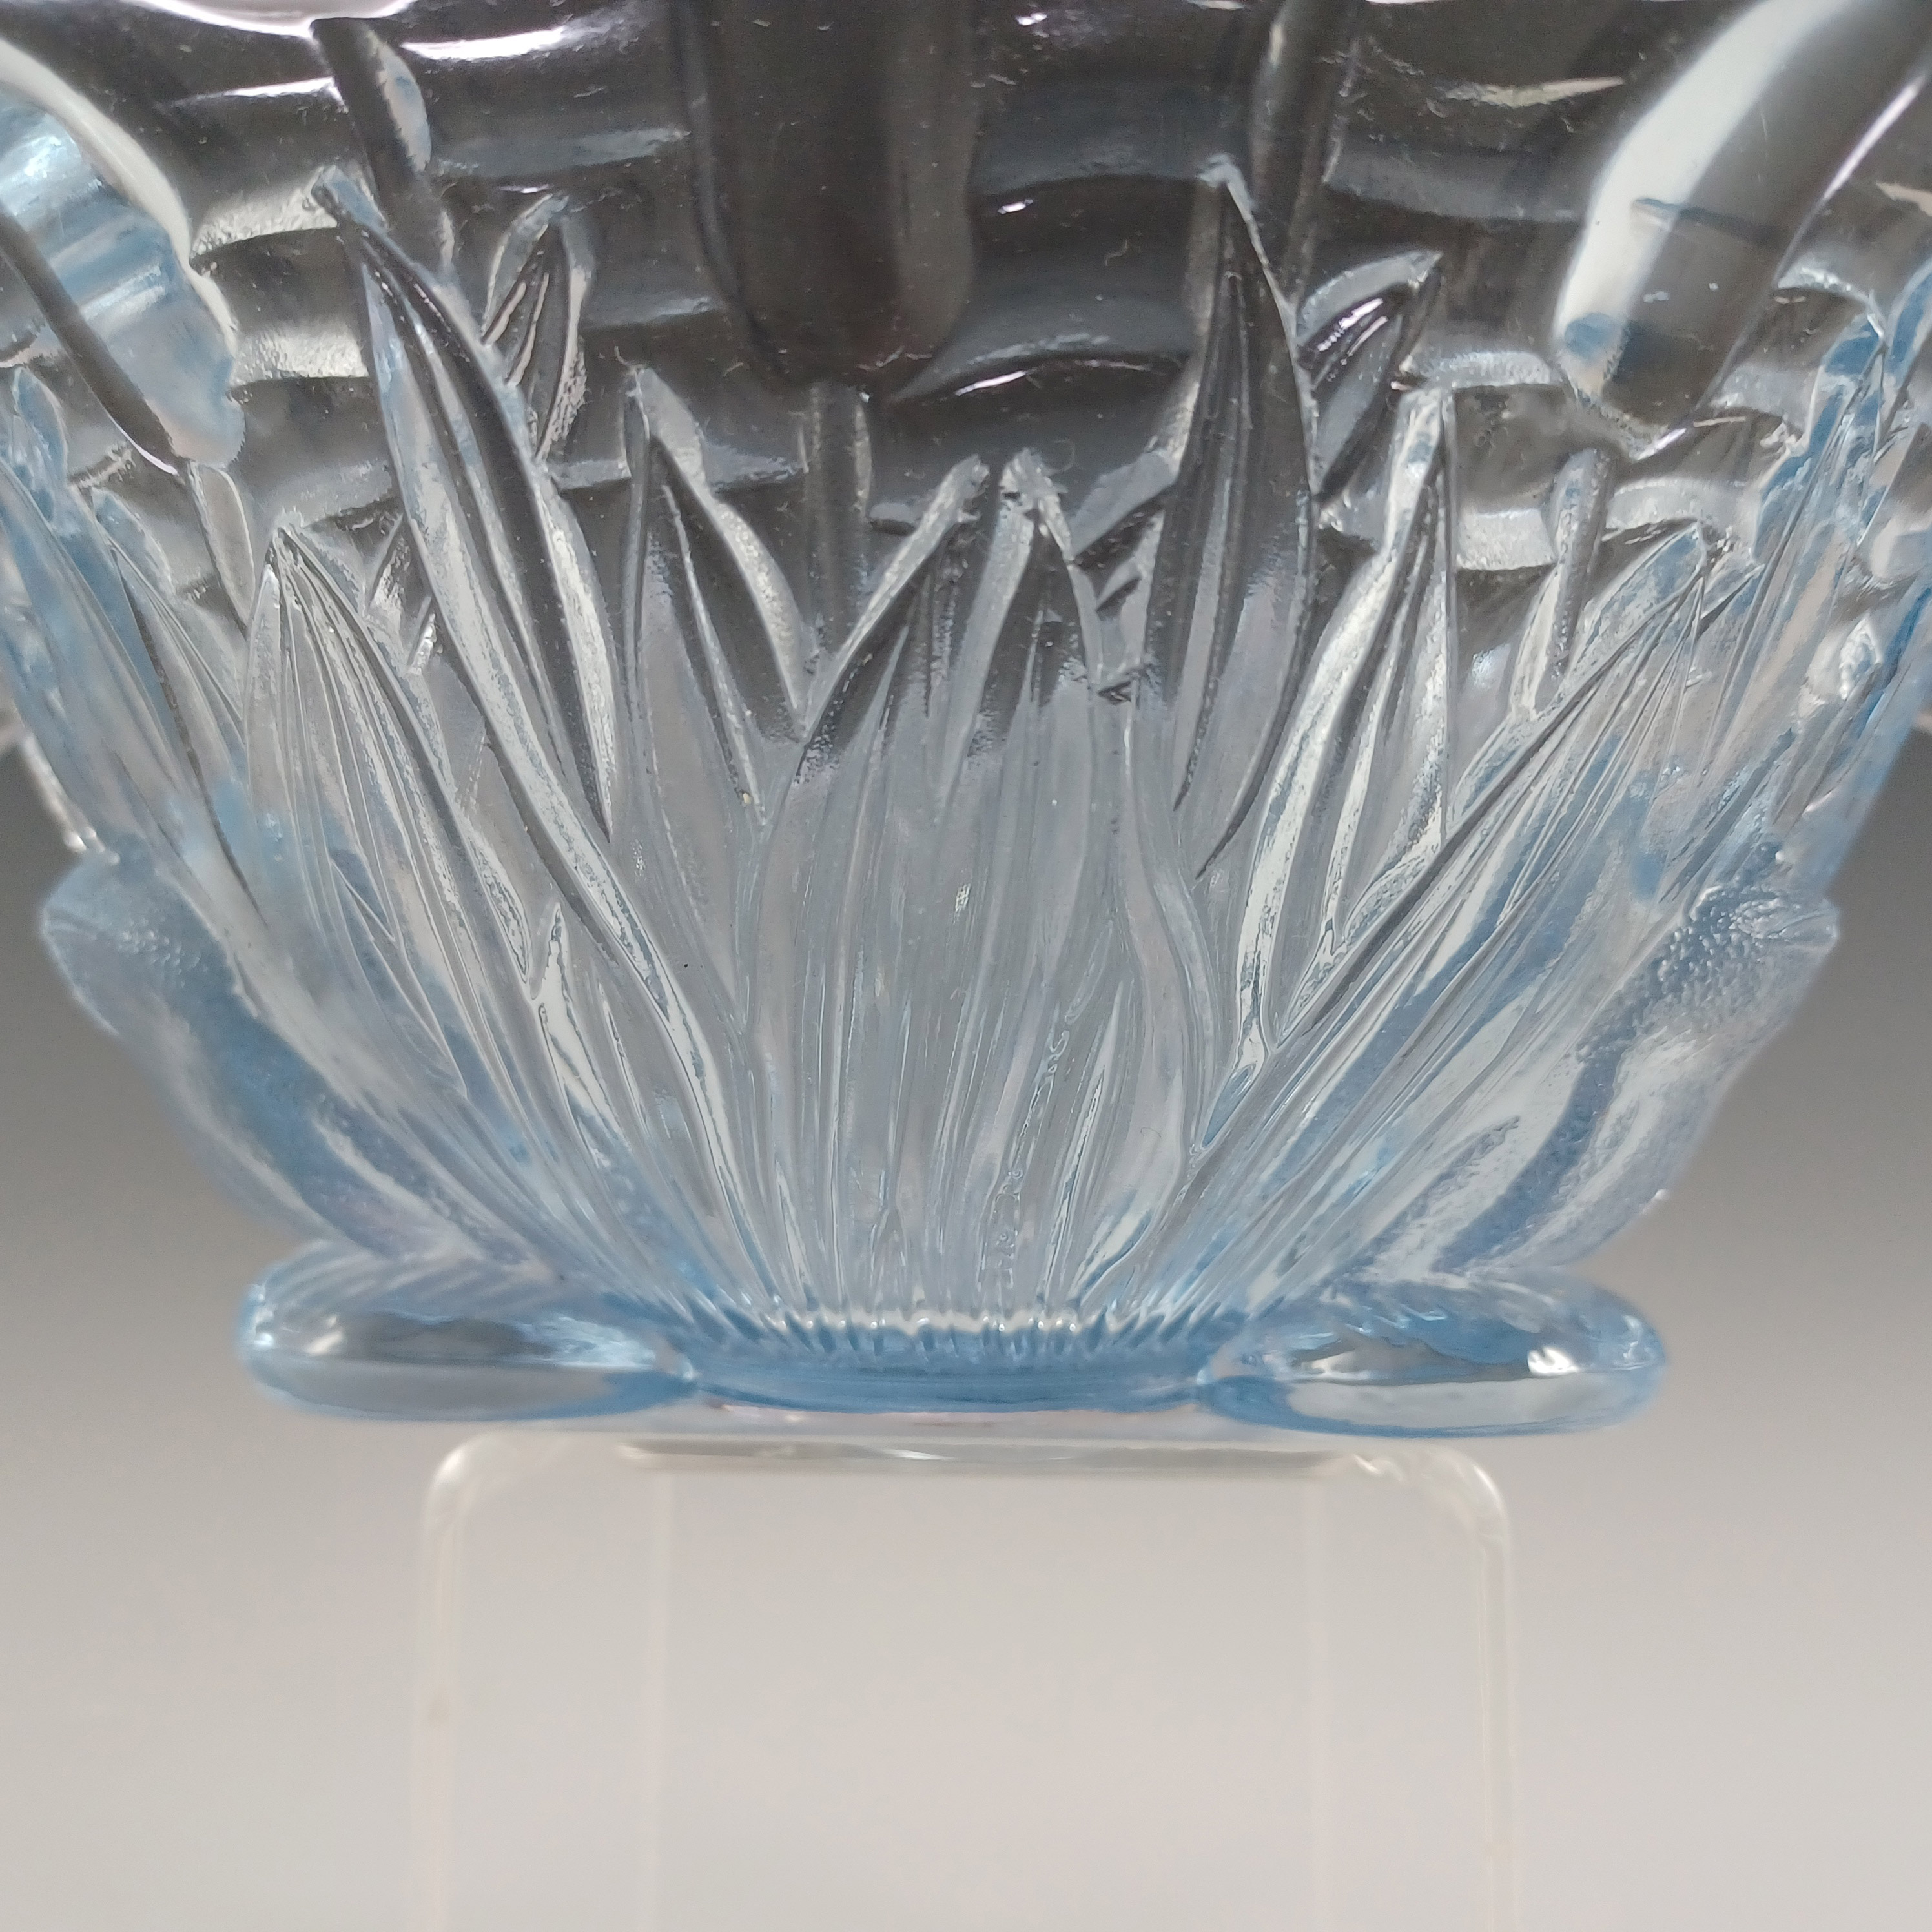 Sowerby Art Deco 1930s Blue Glass Frog & Bullrush Bowl - Click Image to Close